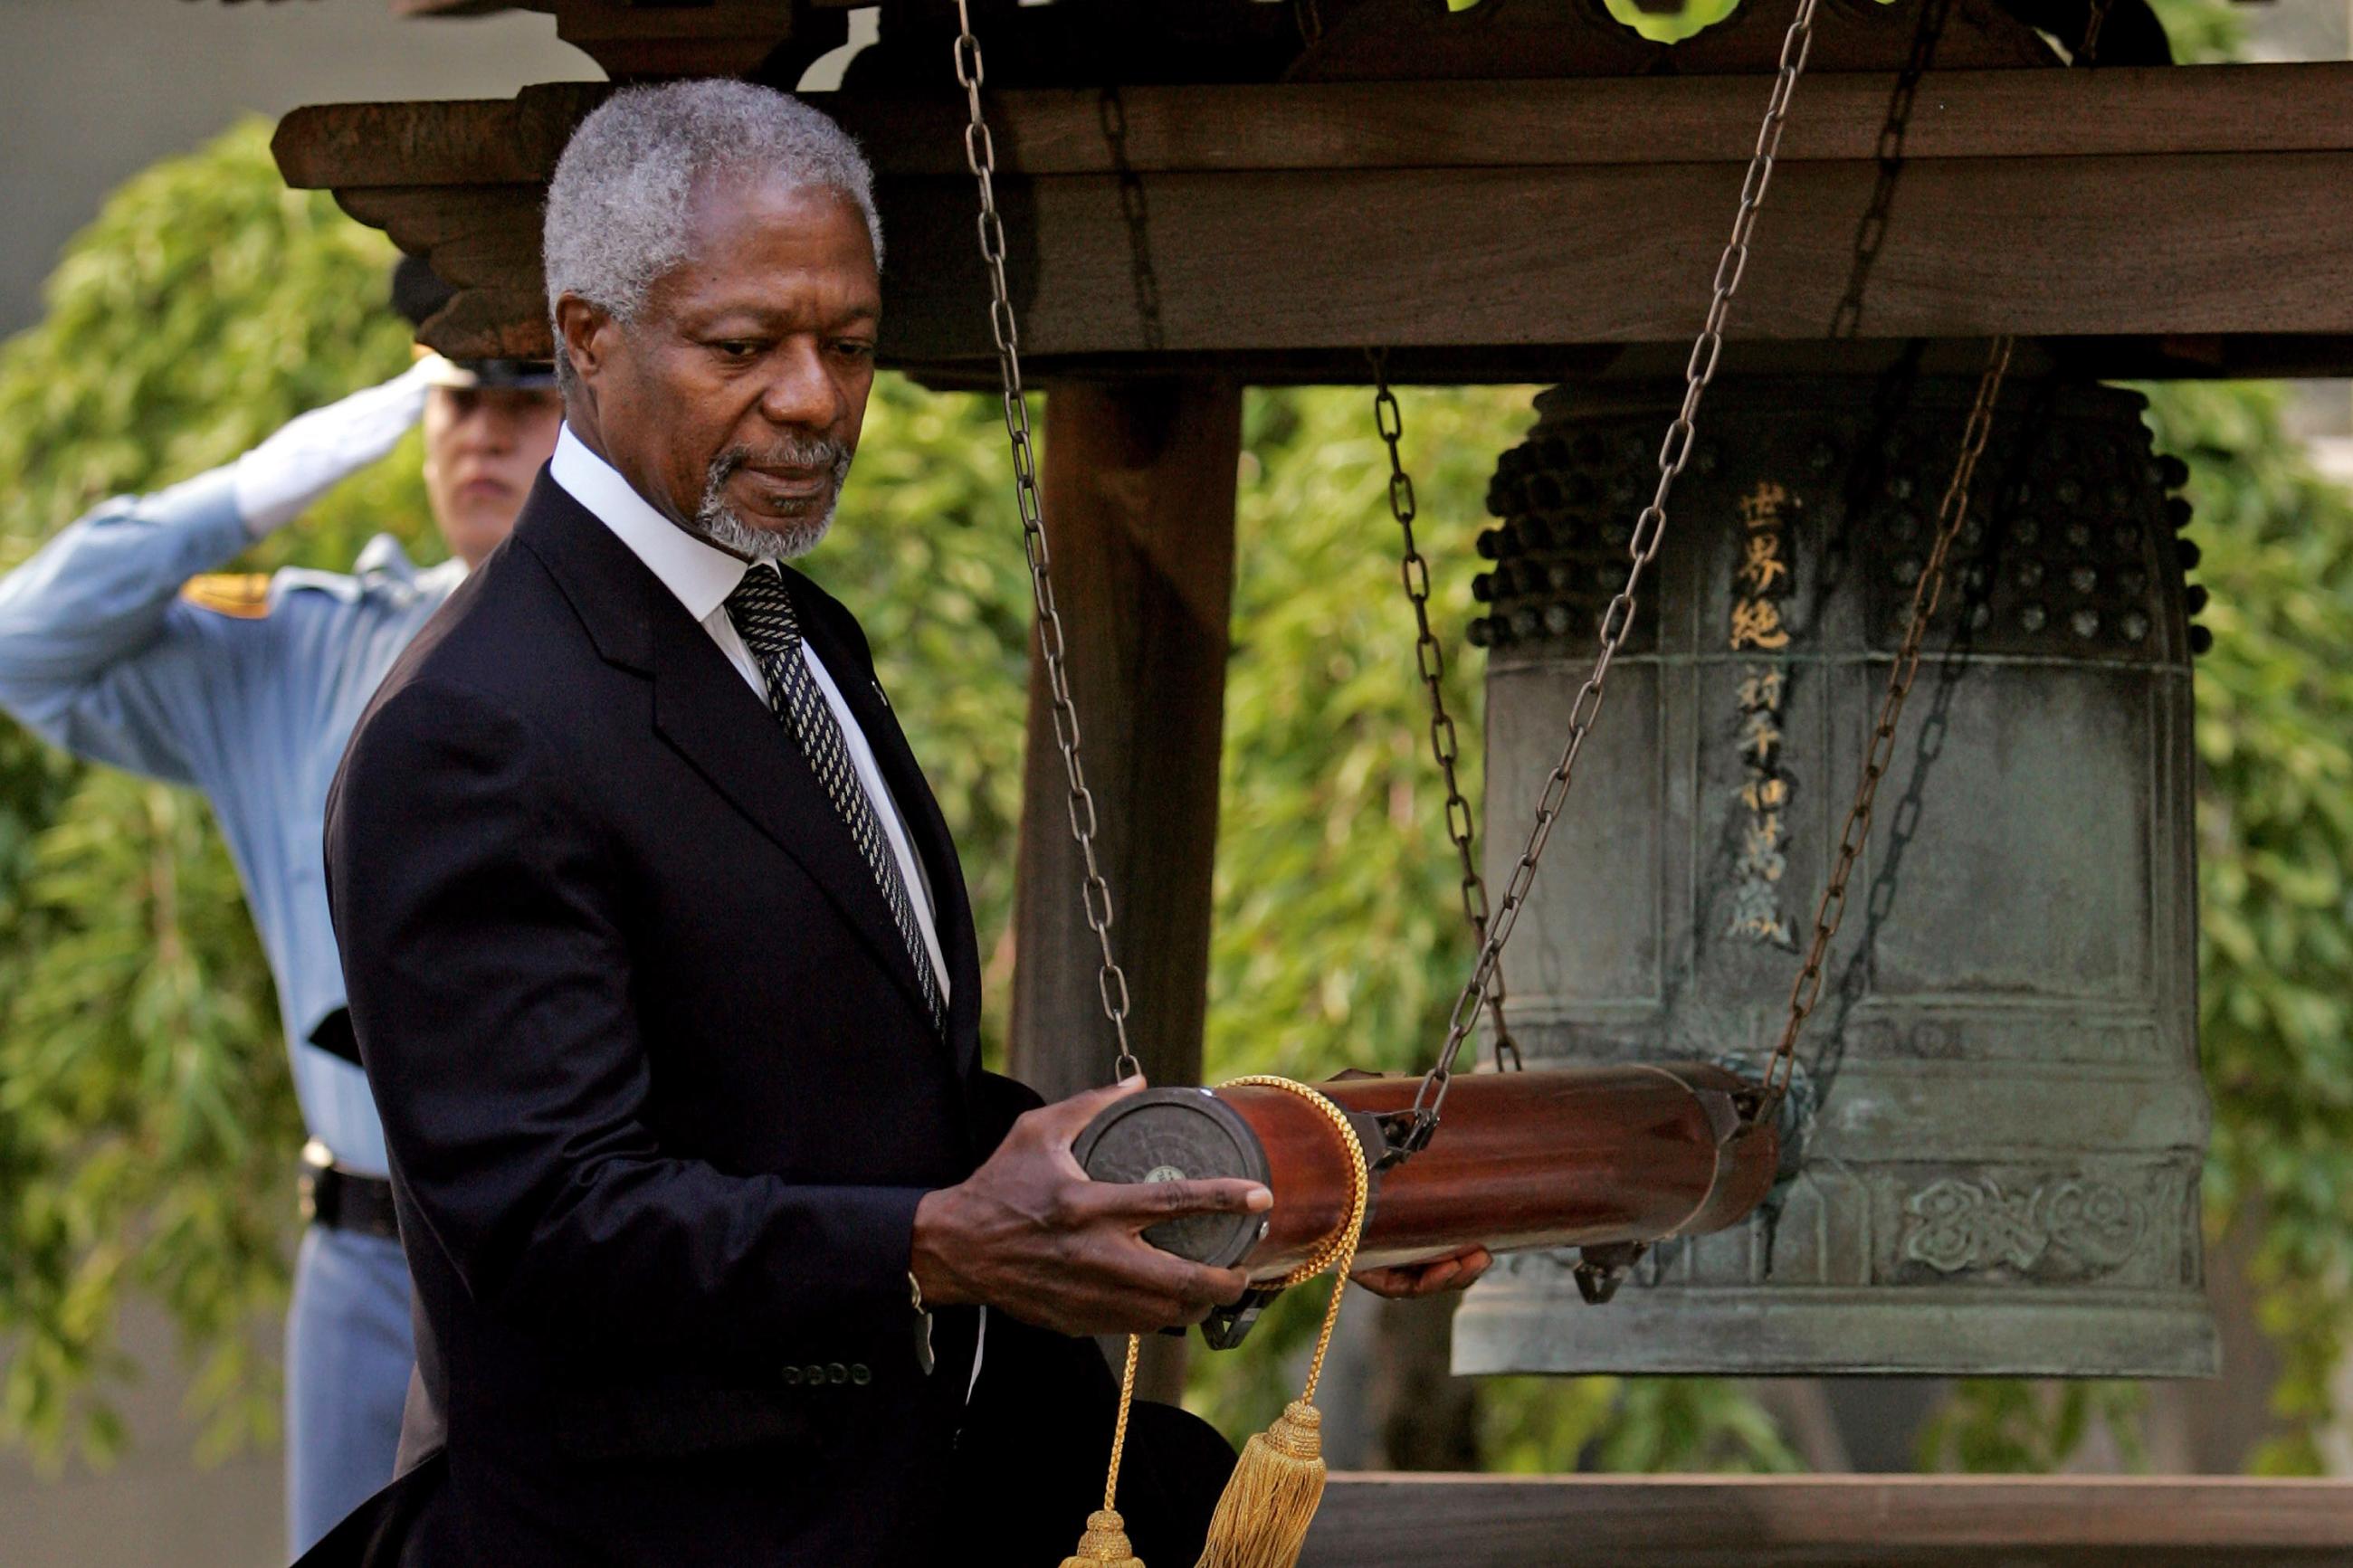 UN Secretary General Kofi Annan rings the Peace Bell at the 61st General Assembly of the United Nations in New York, September 21, 2006.